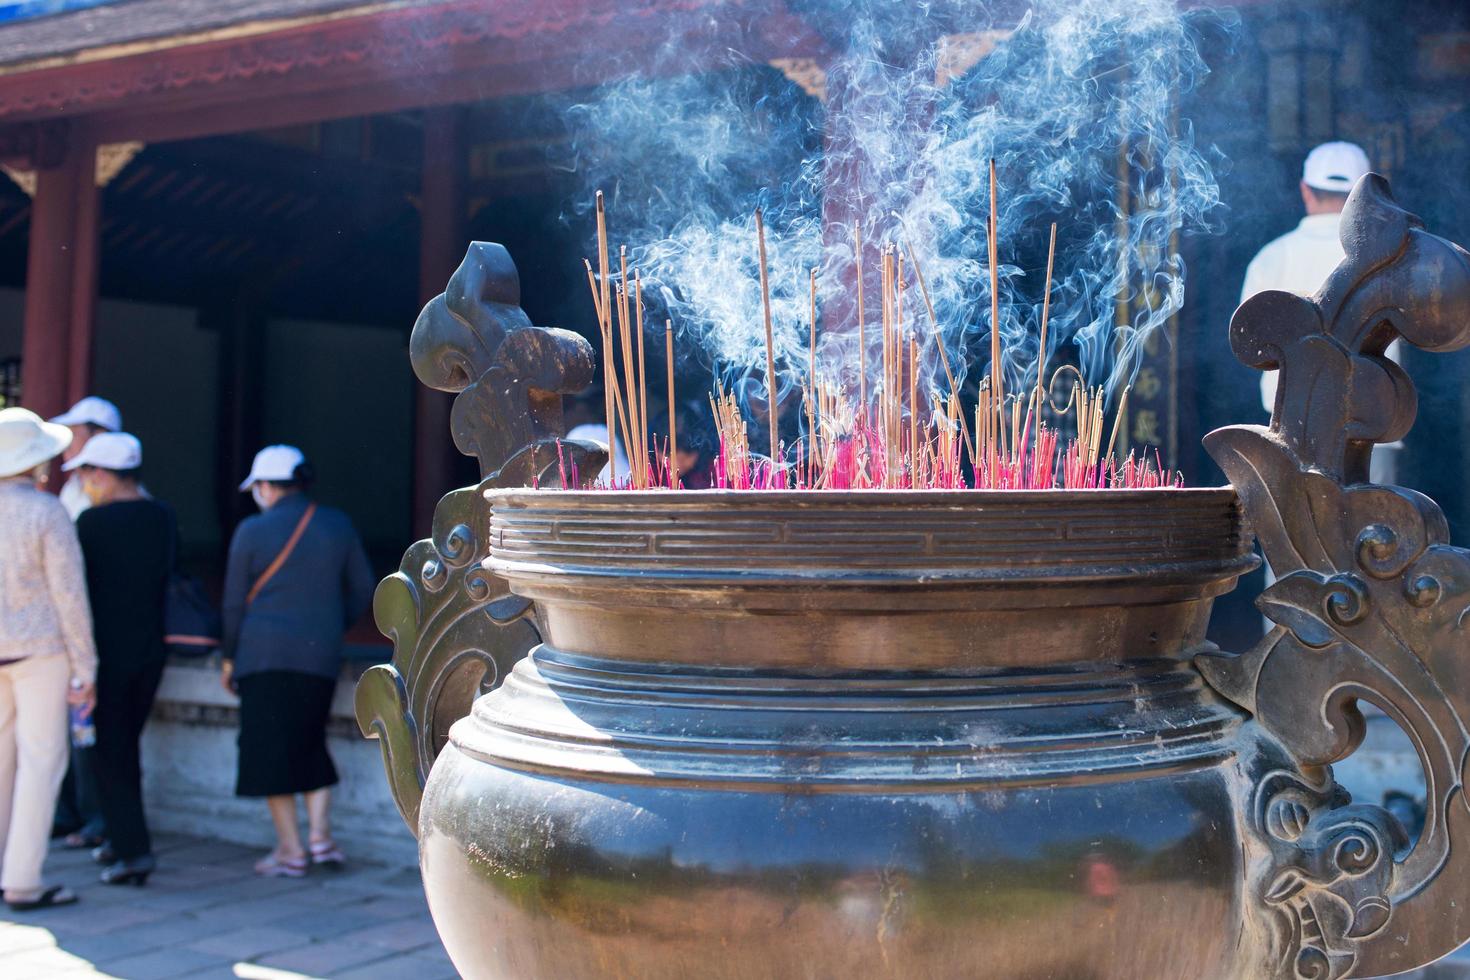 Incense sticks burning in a big pot as temple offering. Vietnam. Incidental people in the background photo